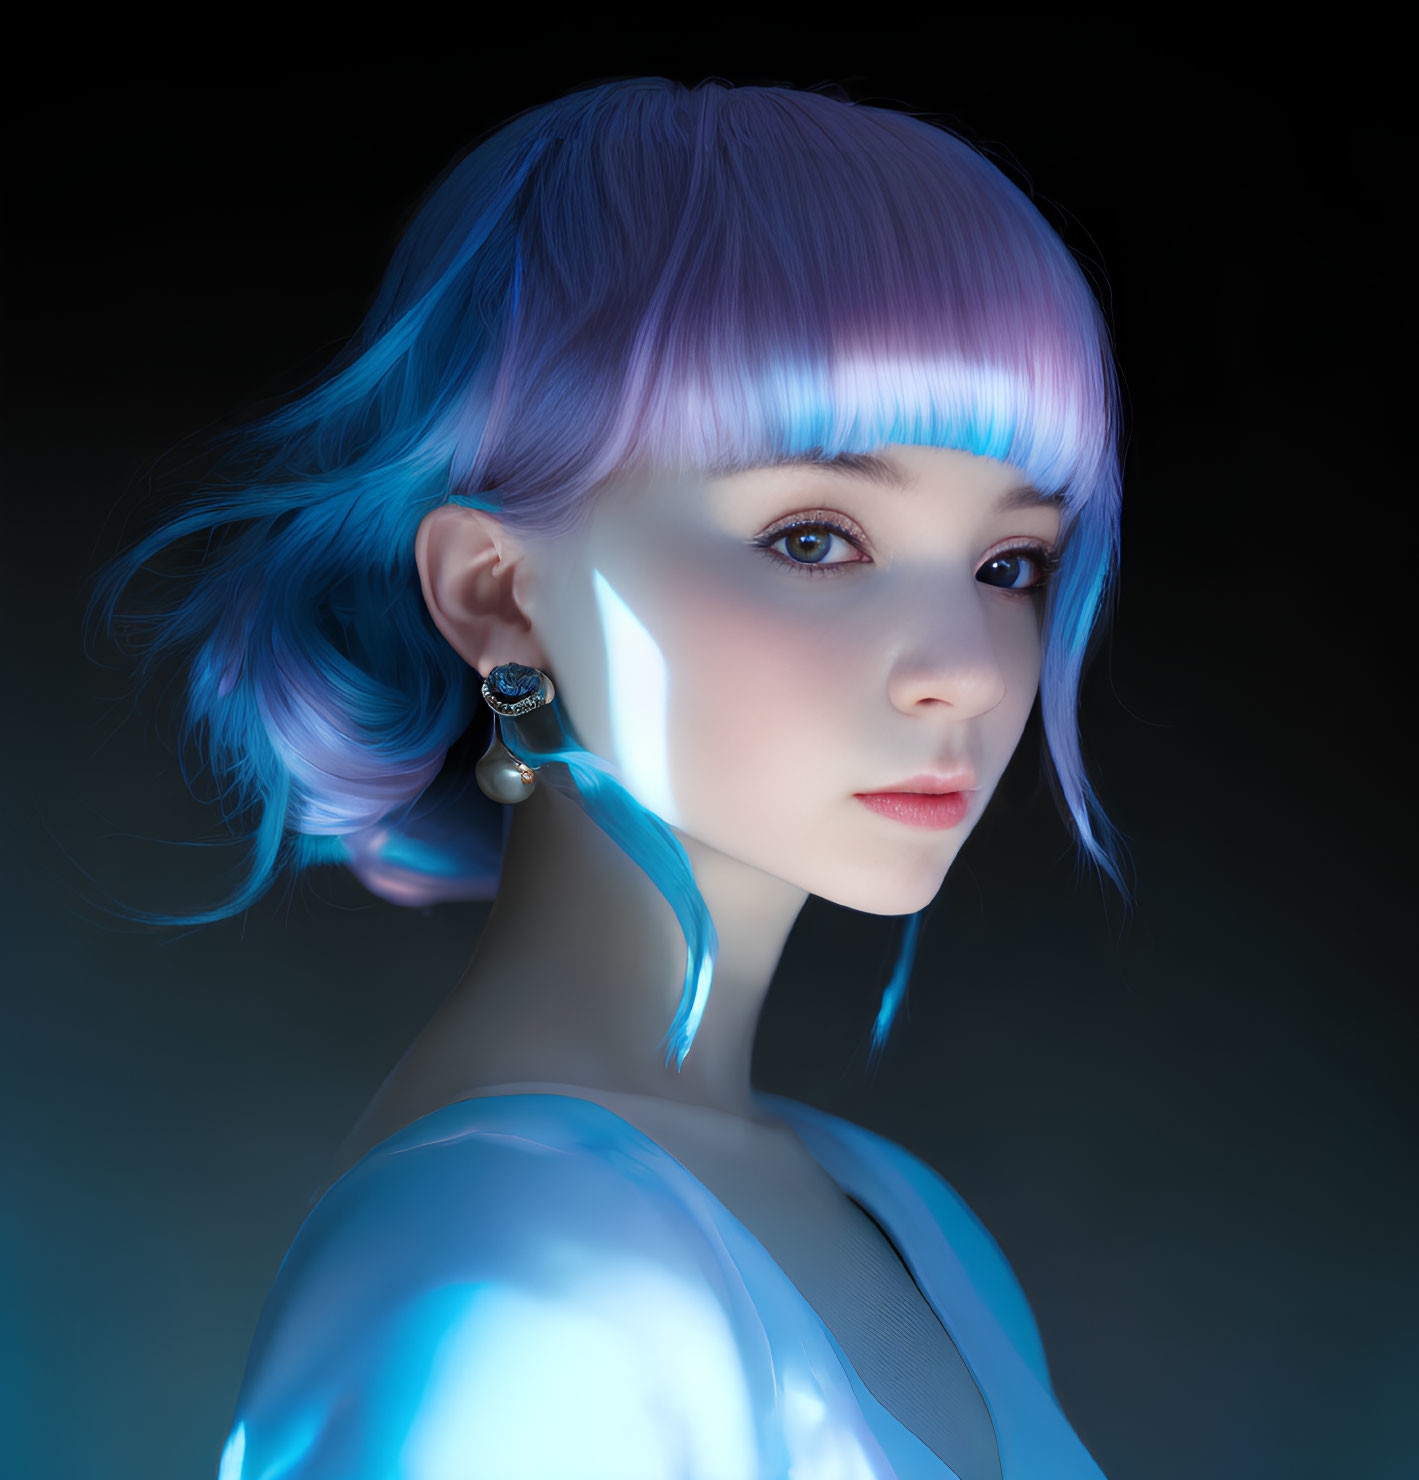 Portrait of person with pastel blue hair and bangs under soft blue light